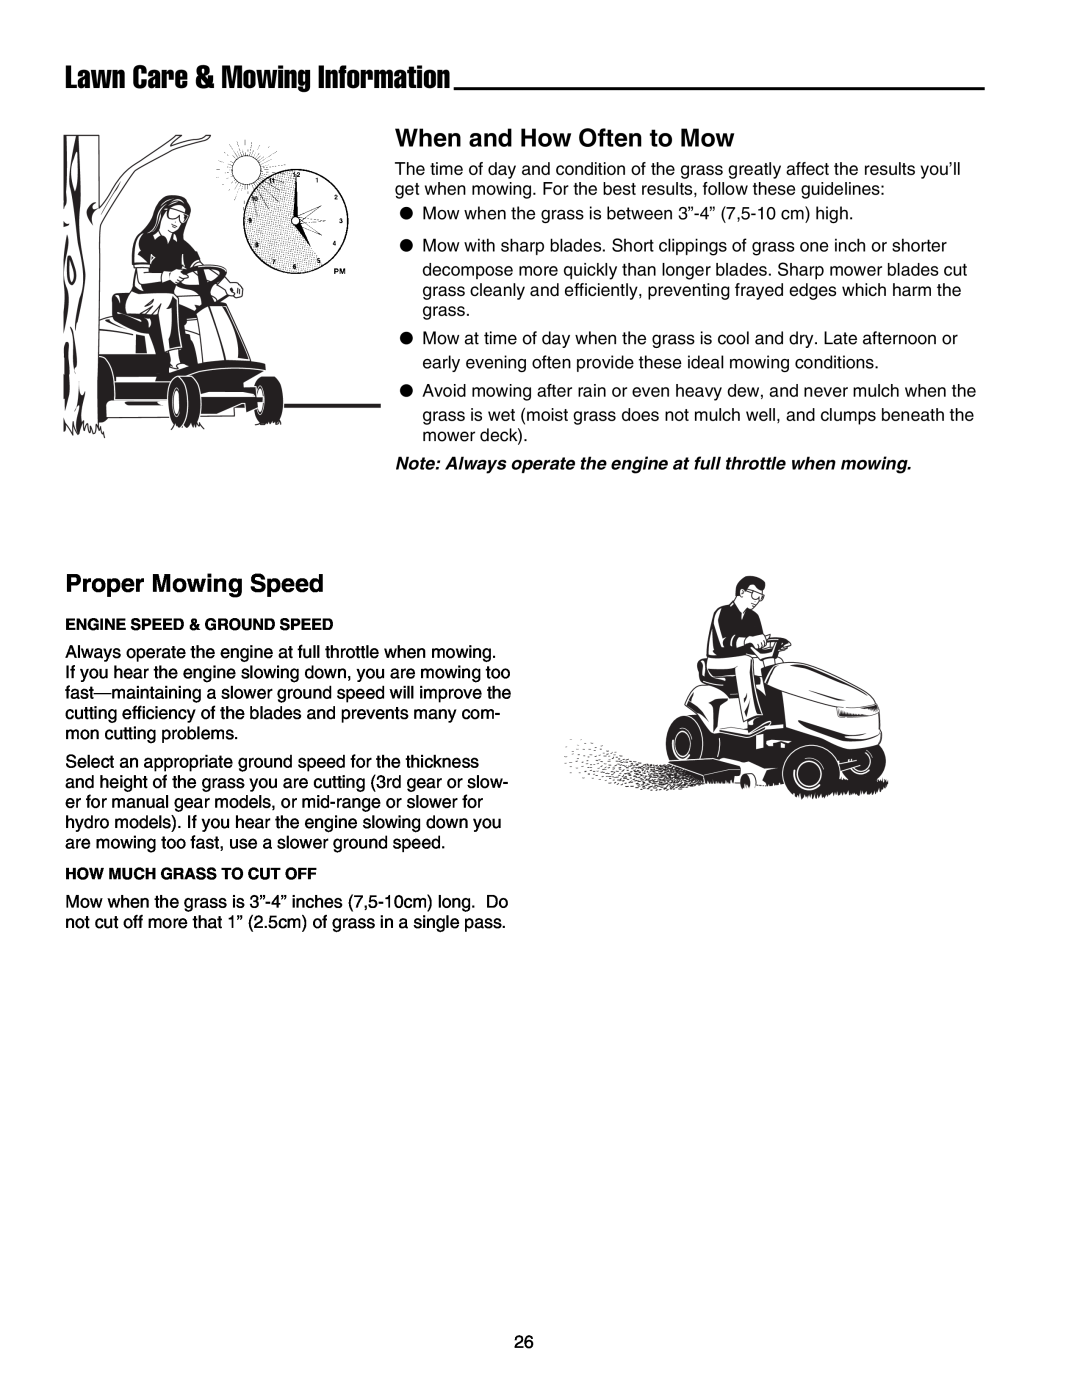 Snapper 1800, 2800, 500, 1700, 2700, 400 Lawn Care & Mowing Information, When and How Often to Mow, Proper Mowing Speed 